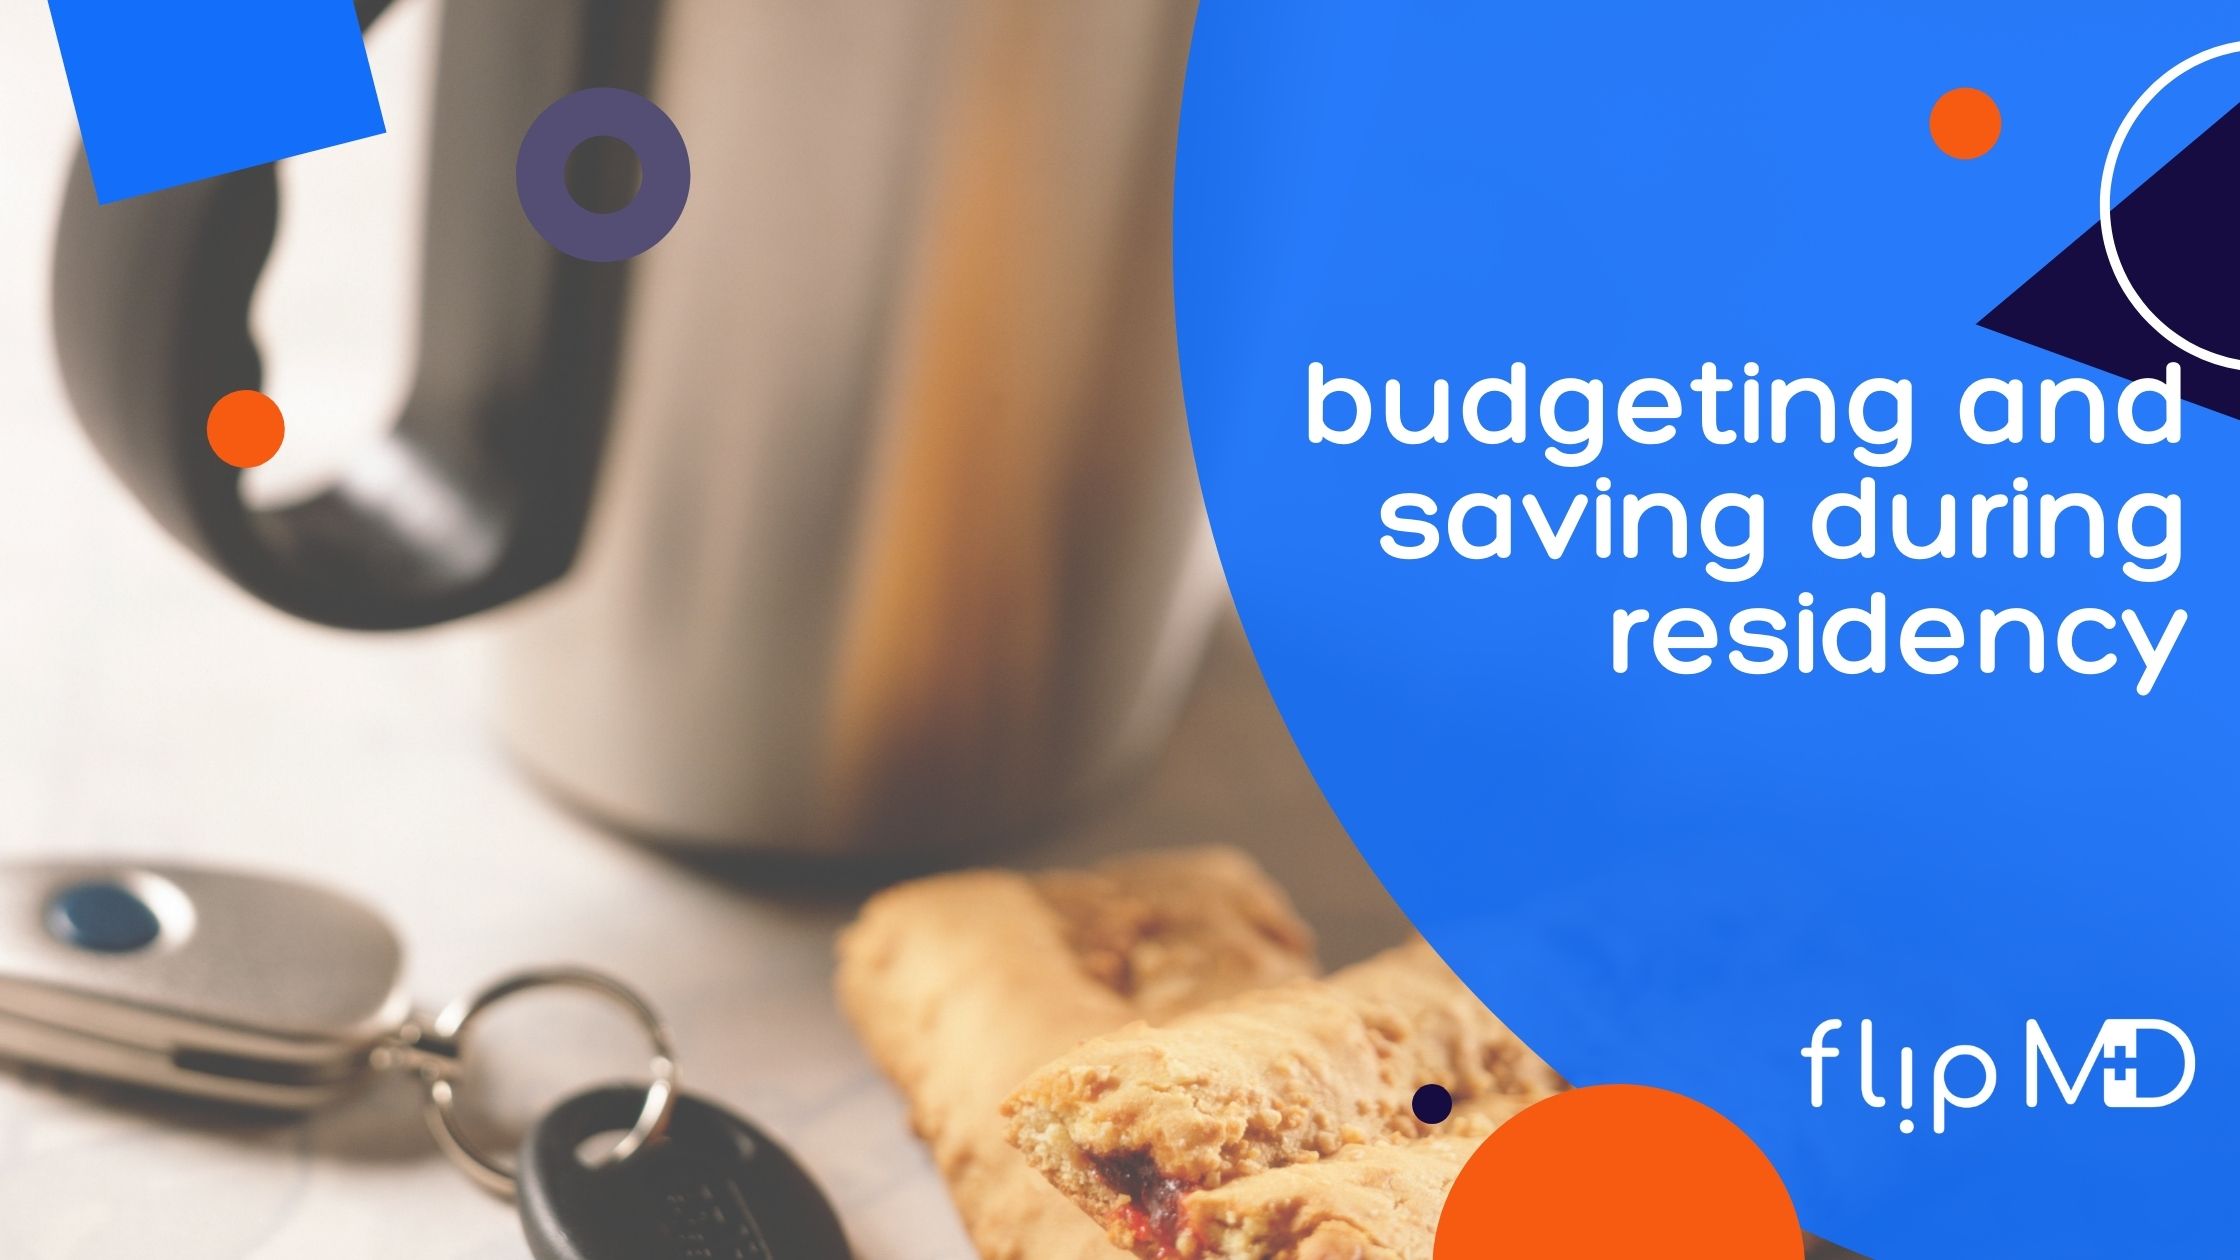 How to budget on residency salary